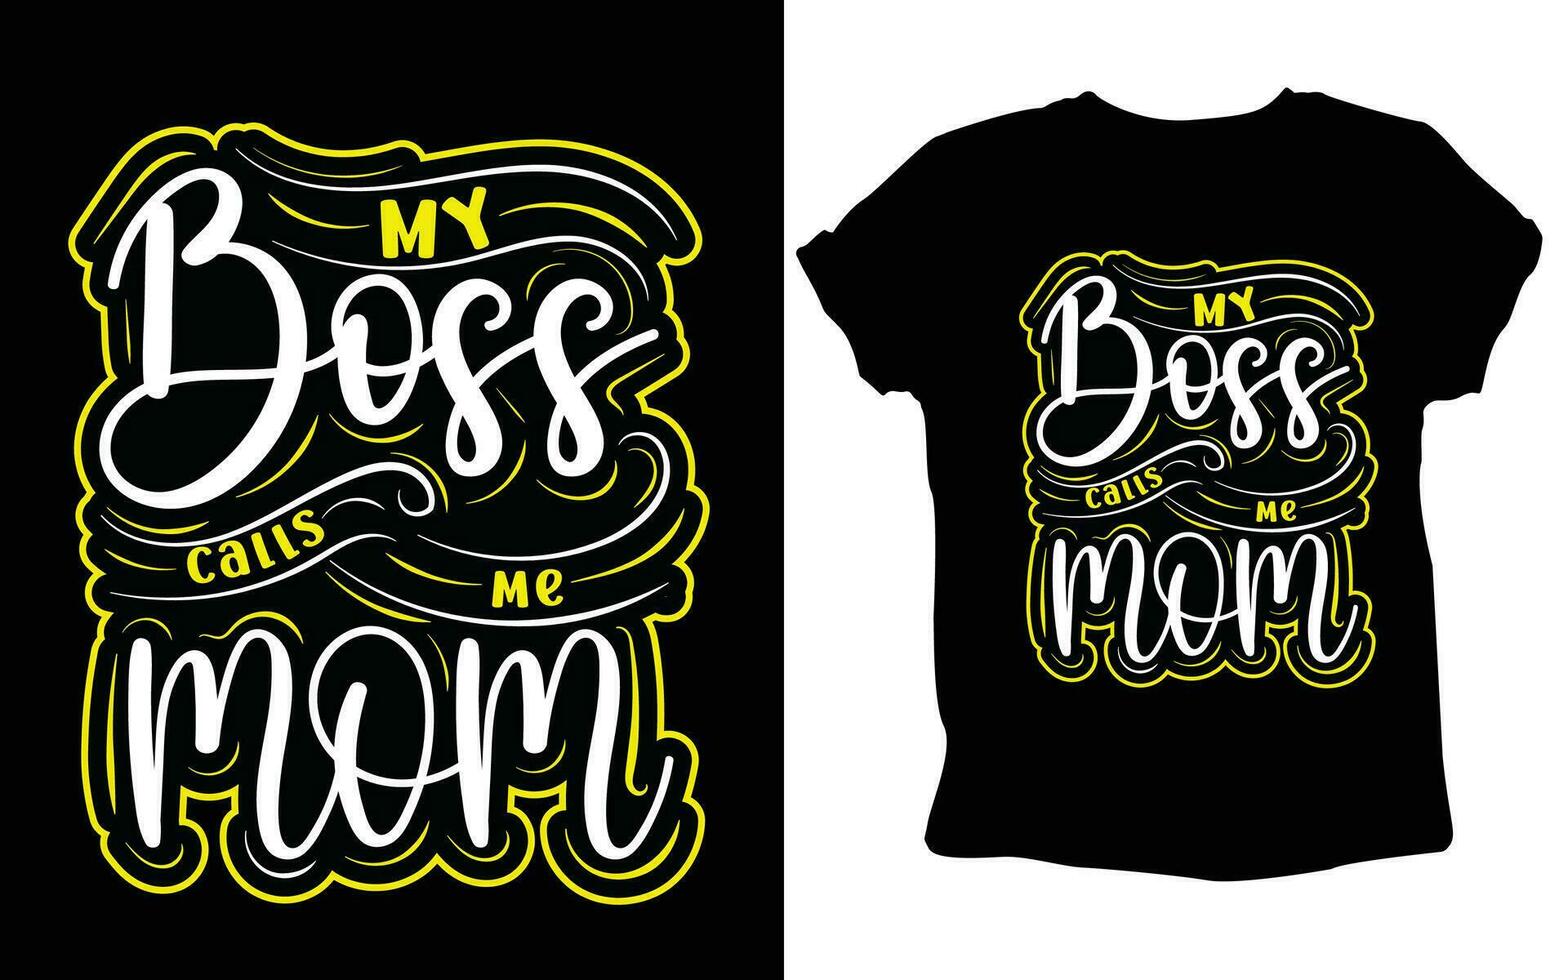 Mom t-shirt design, mother's day t-shirt, mother's day typography t-shirt, Happy Mother's Day typography T shirt for mother lover. vector